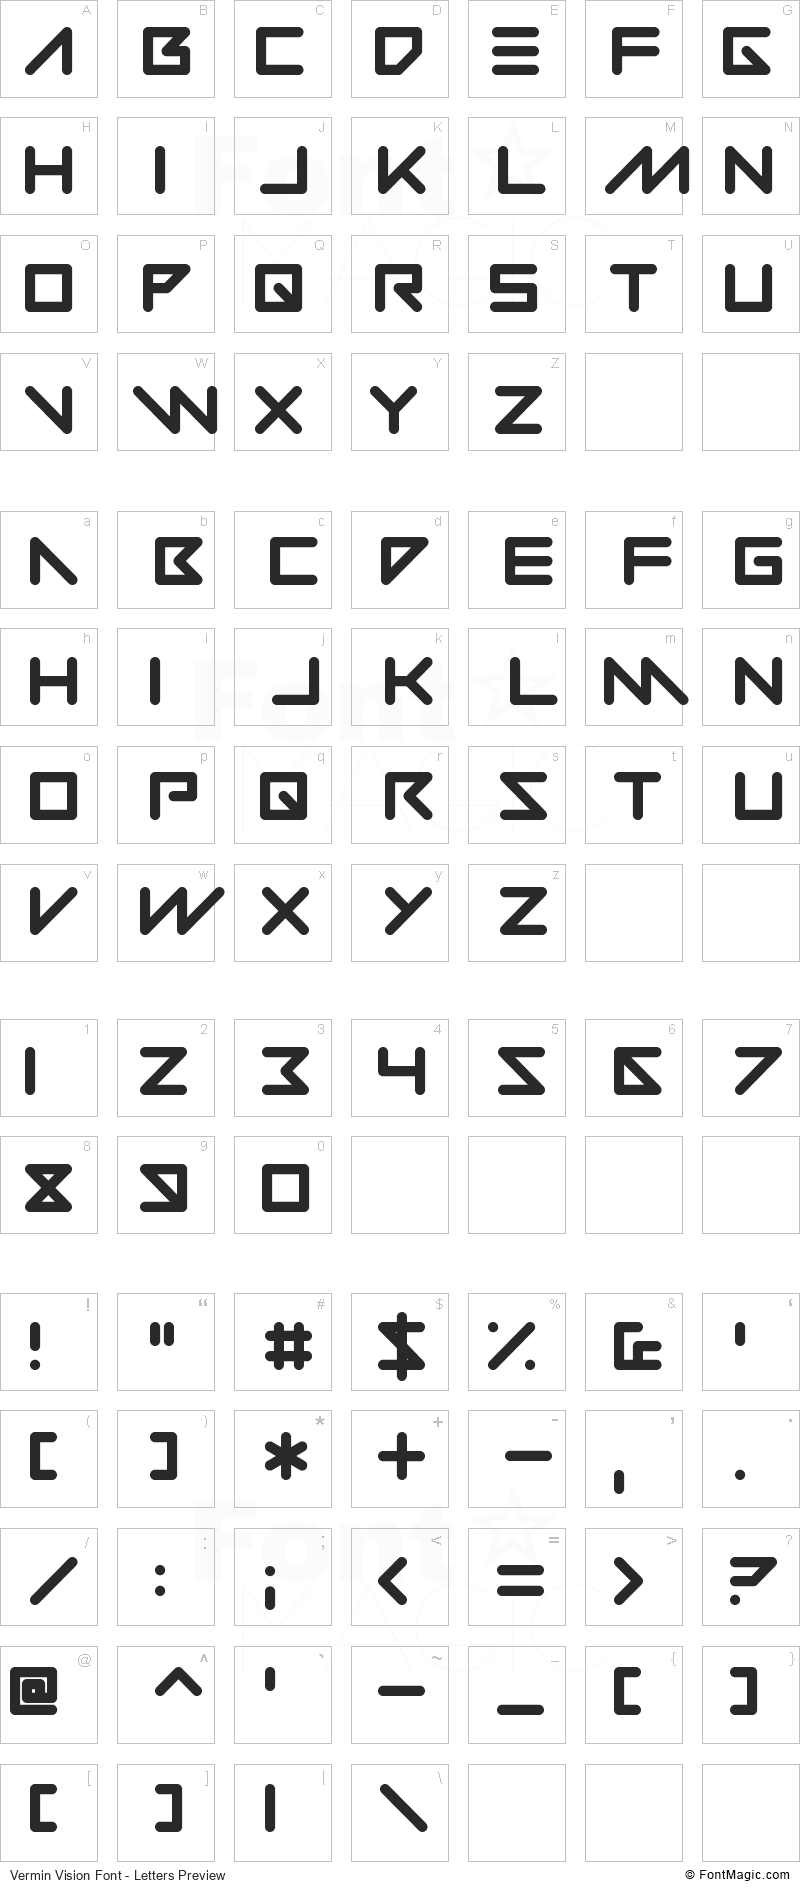 Vermin Vision Font - All Latters Preview Chart